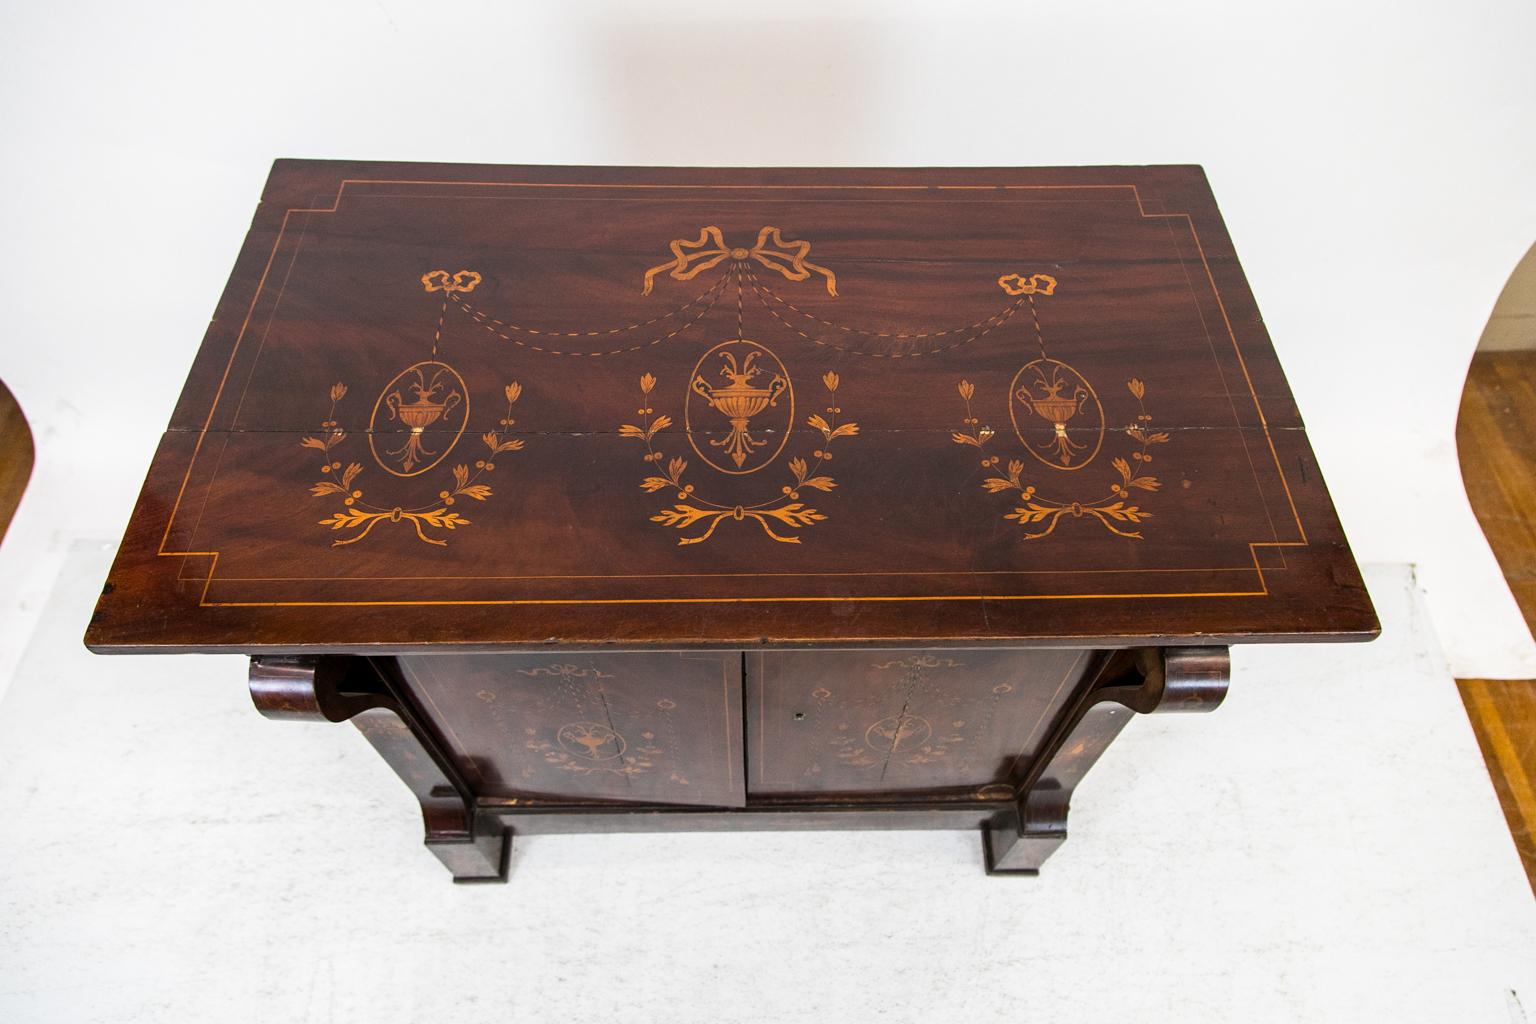 The top of this mahogany inlaid Regency console cabinet is inlaid with interlaced boxwood inlay that frames an inlaid center panel with three classical urns suspended by bow tied ribbons and stylized cords of ebony and boxwood. The three classical